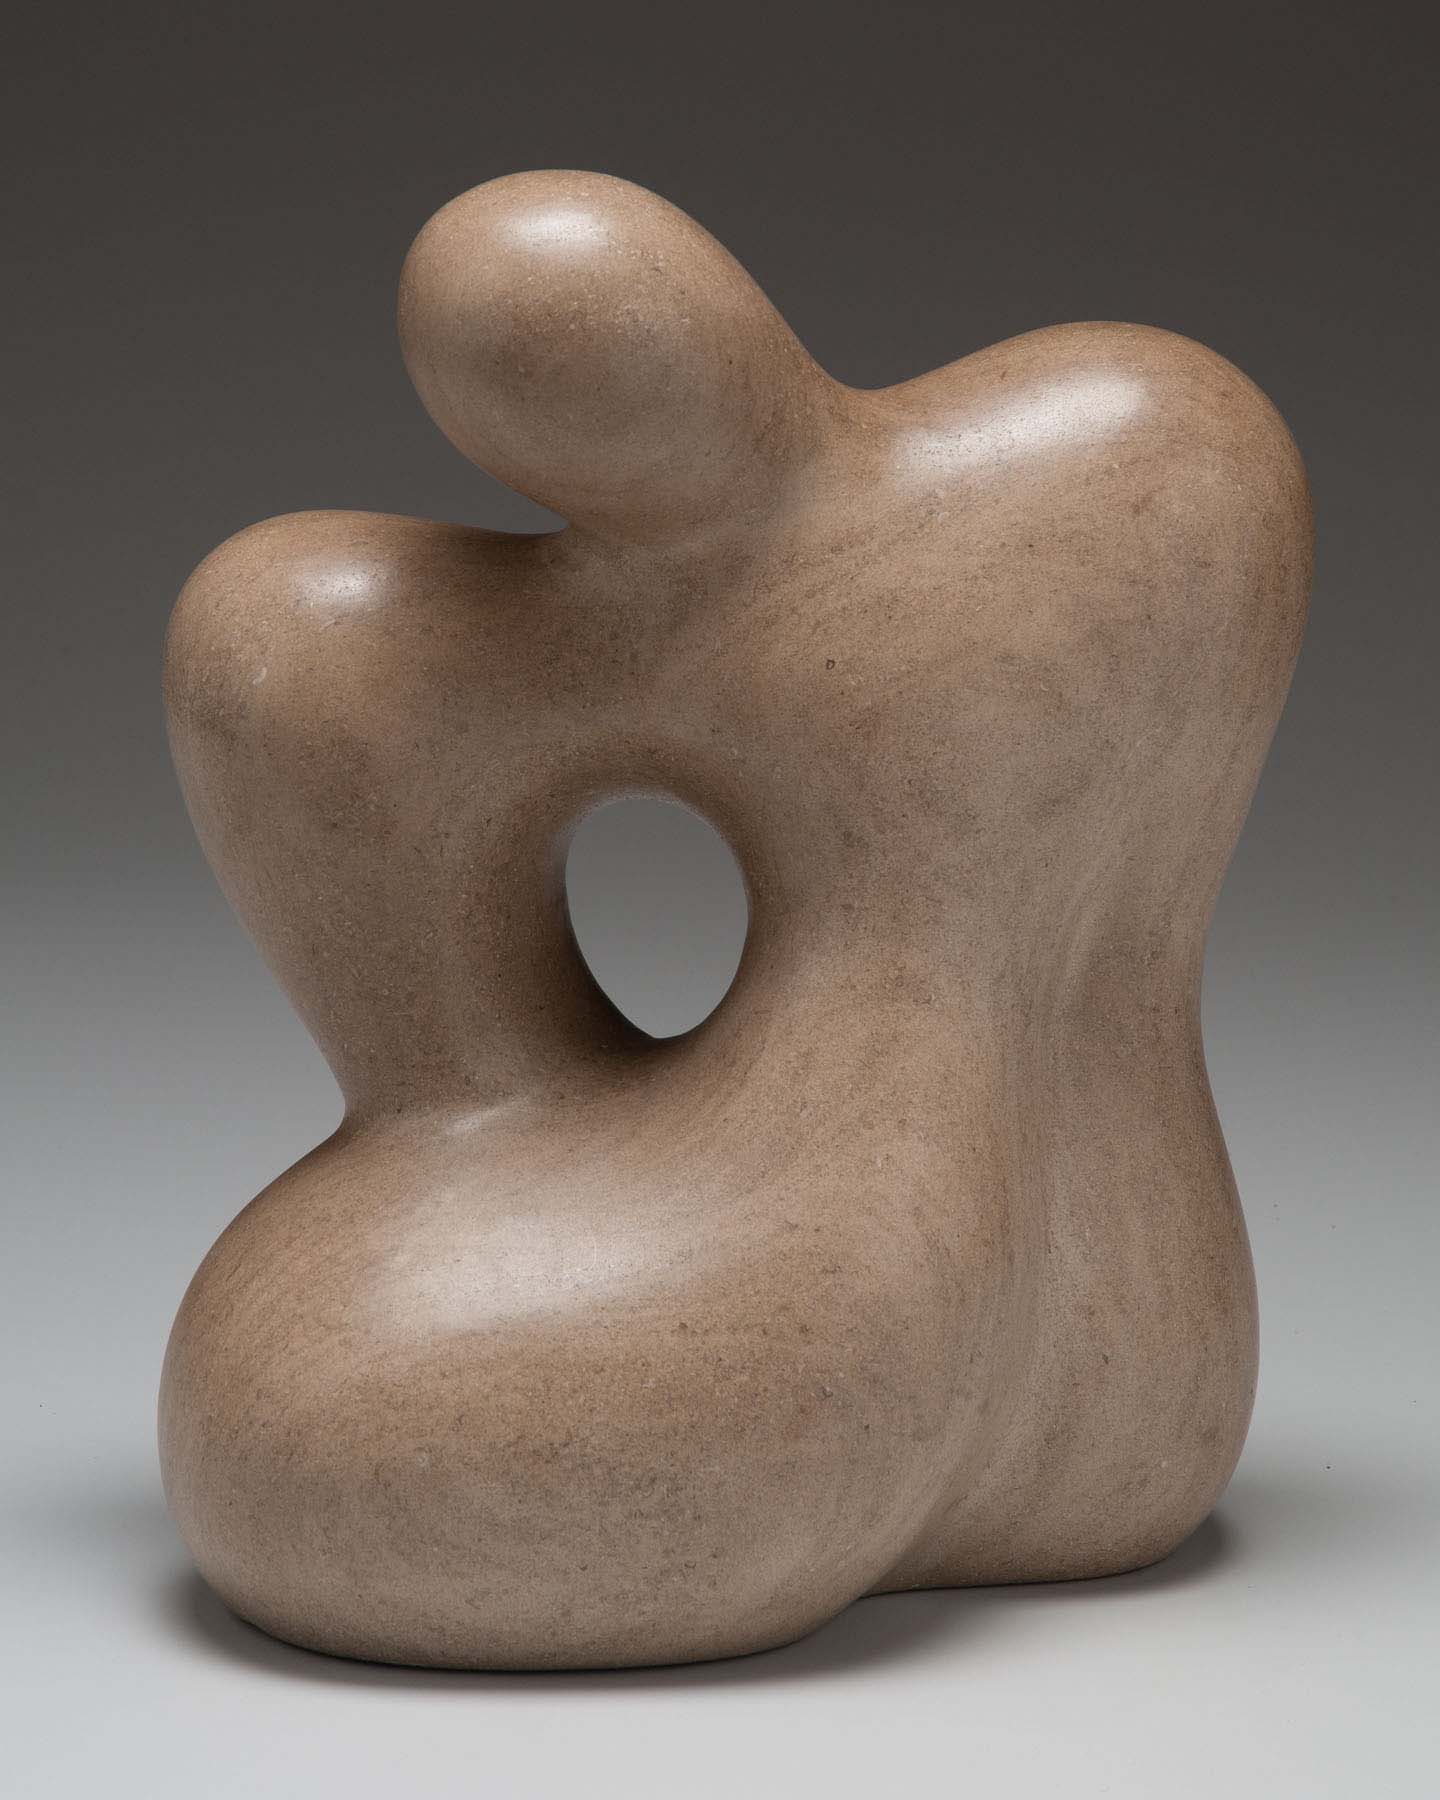 A smooth stone sculpture of an abstract, bulbous seated figure.